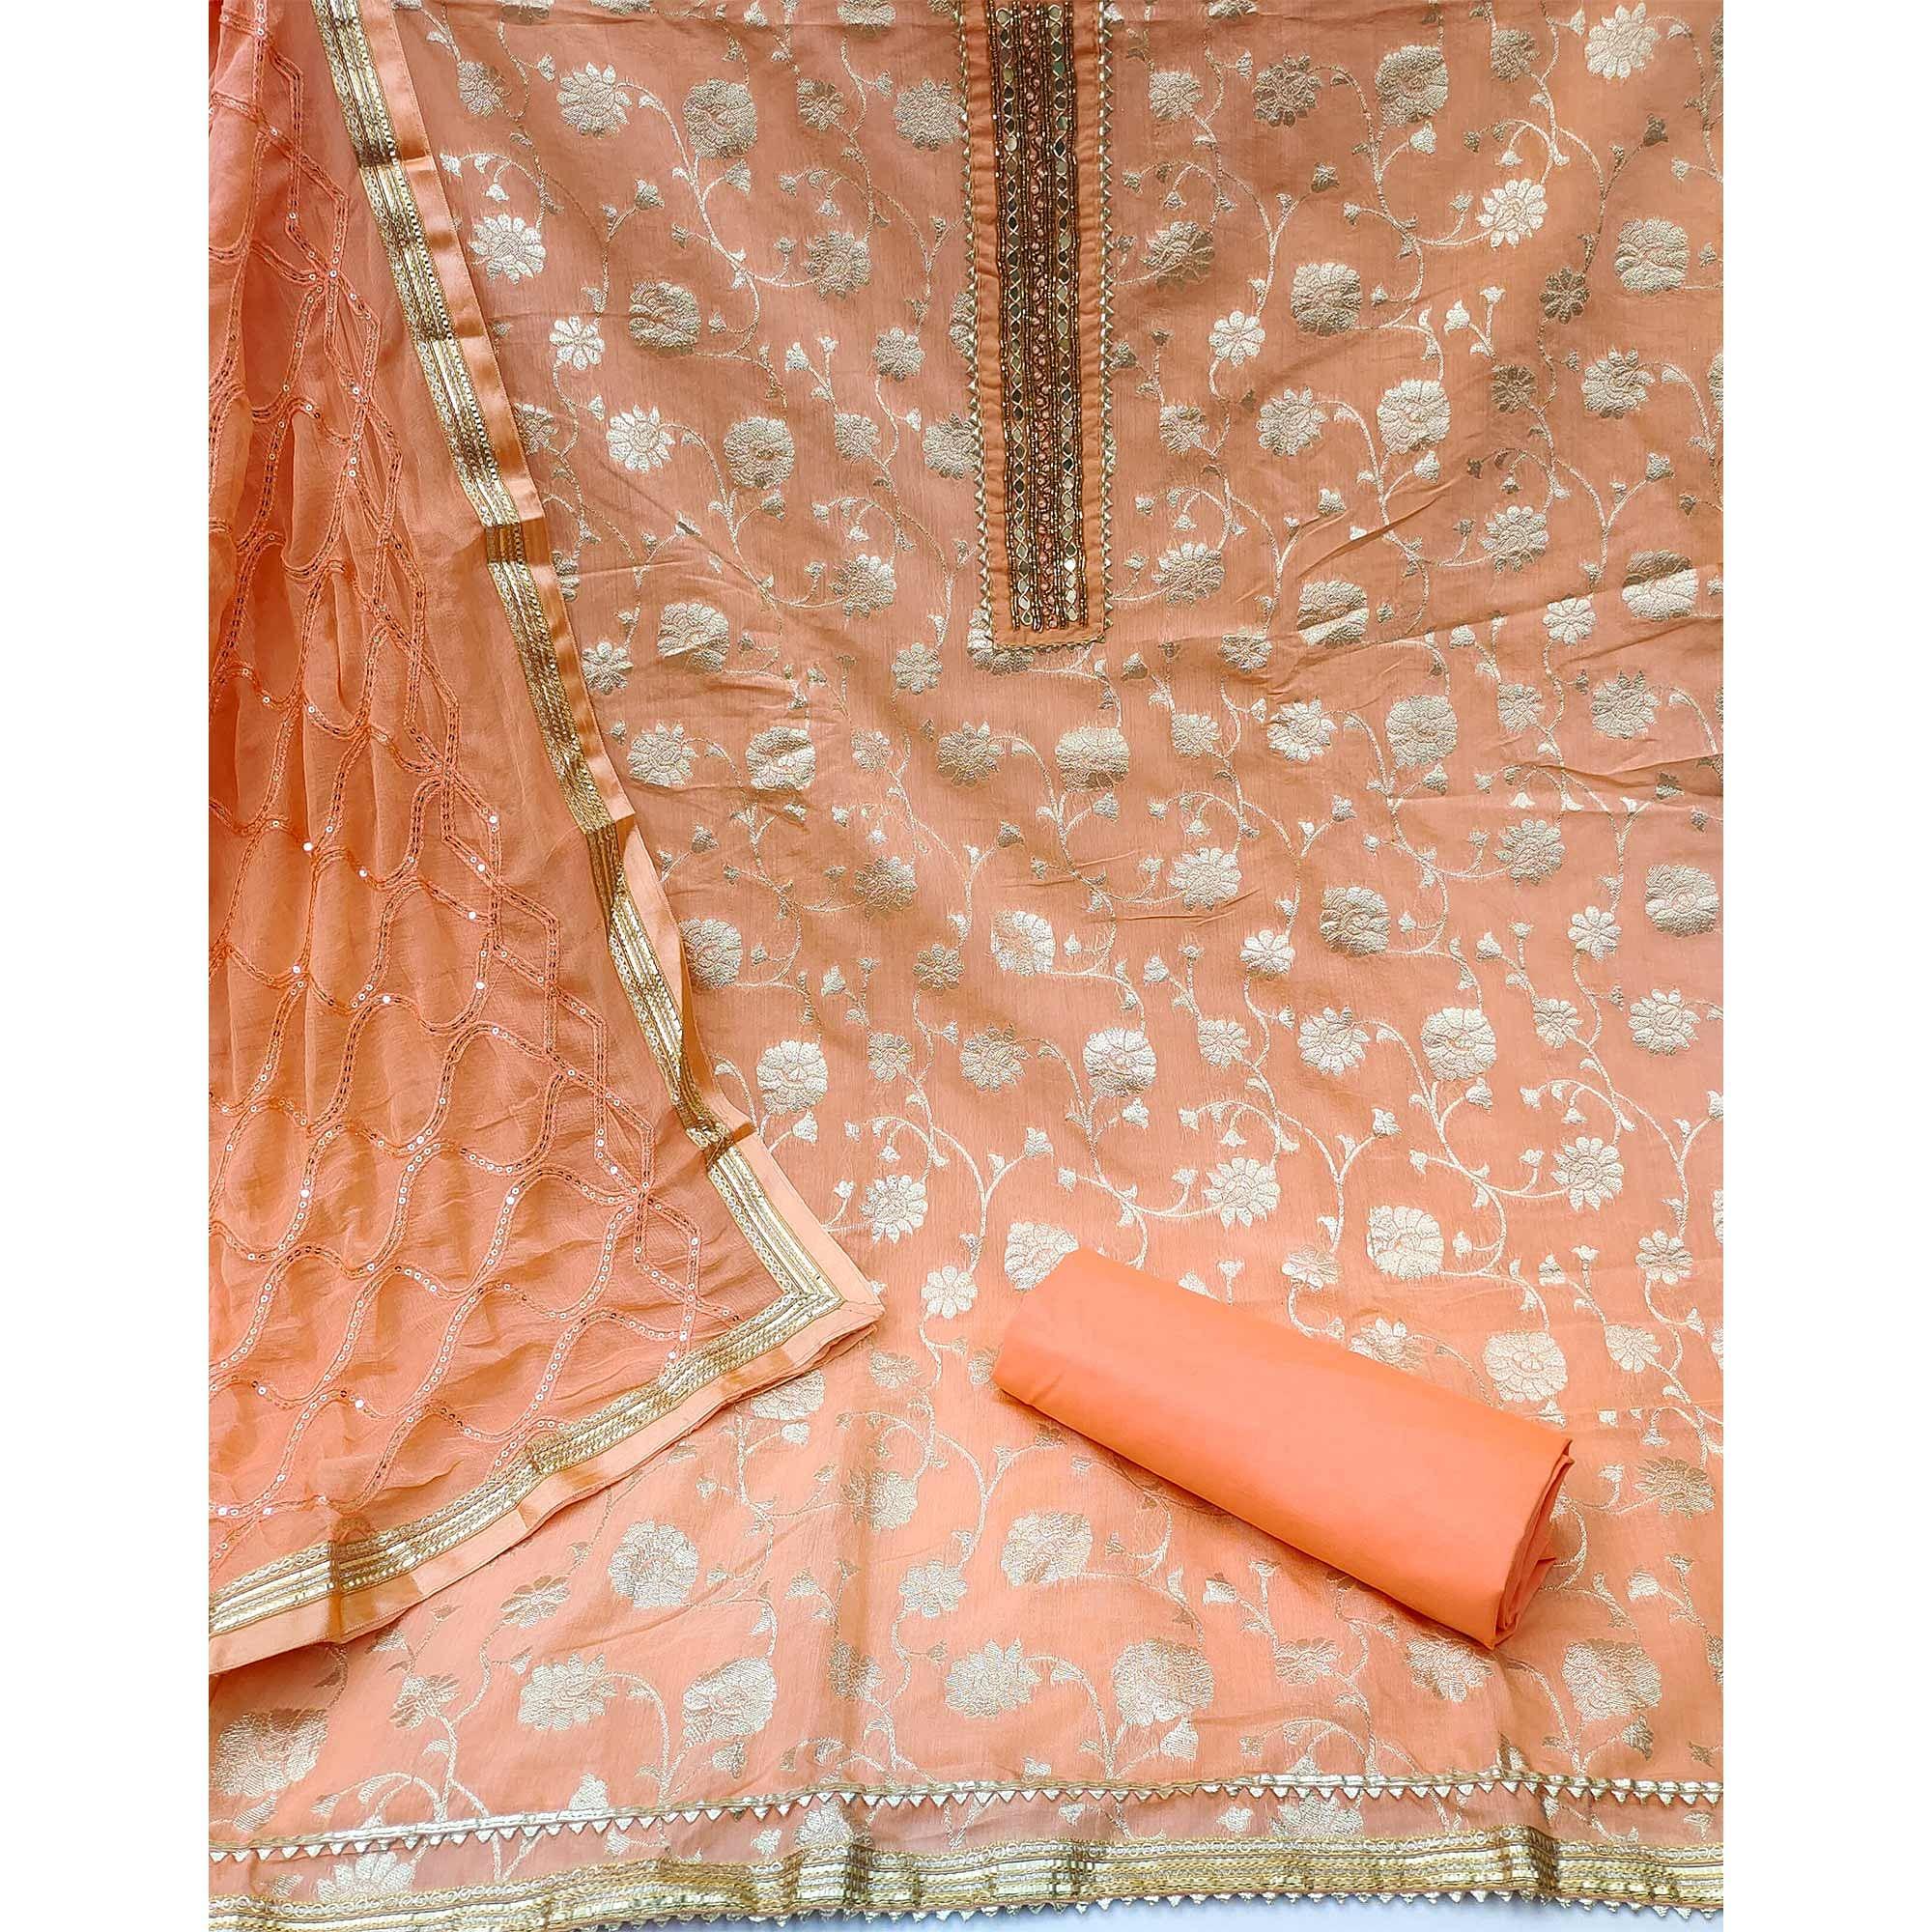 Peach Festive Wear Woven With Embellished Jacquard Dress Material - Peachmode